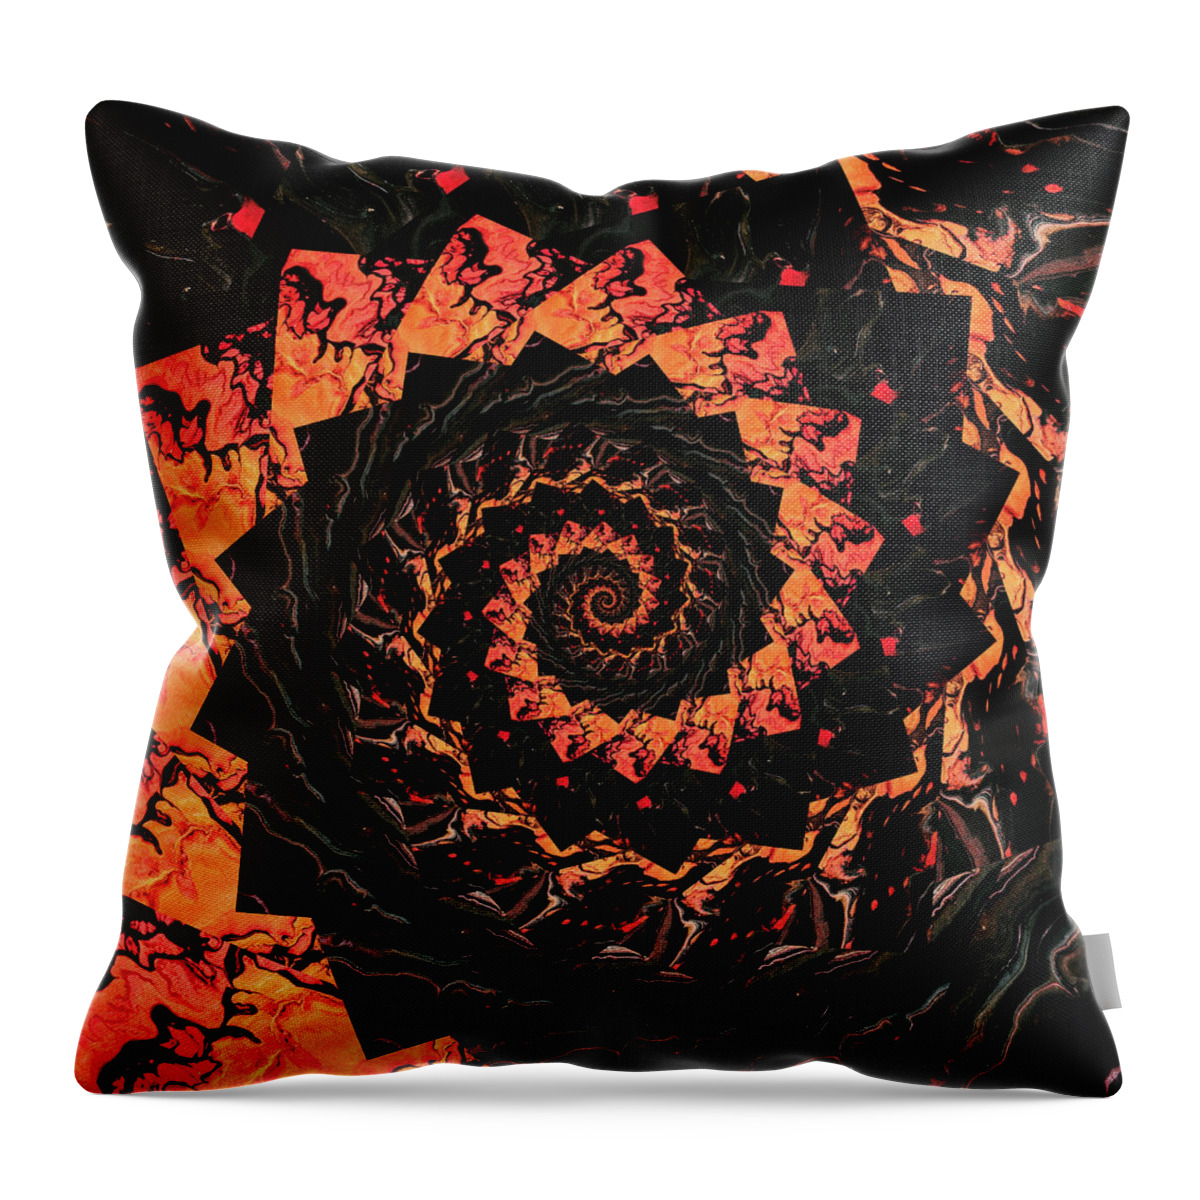 Endless Throw Pillow featuring the digital art Infinity Tunnel Spiral Lava 4 by Pelo Blanco Photo